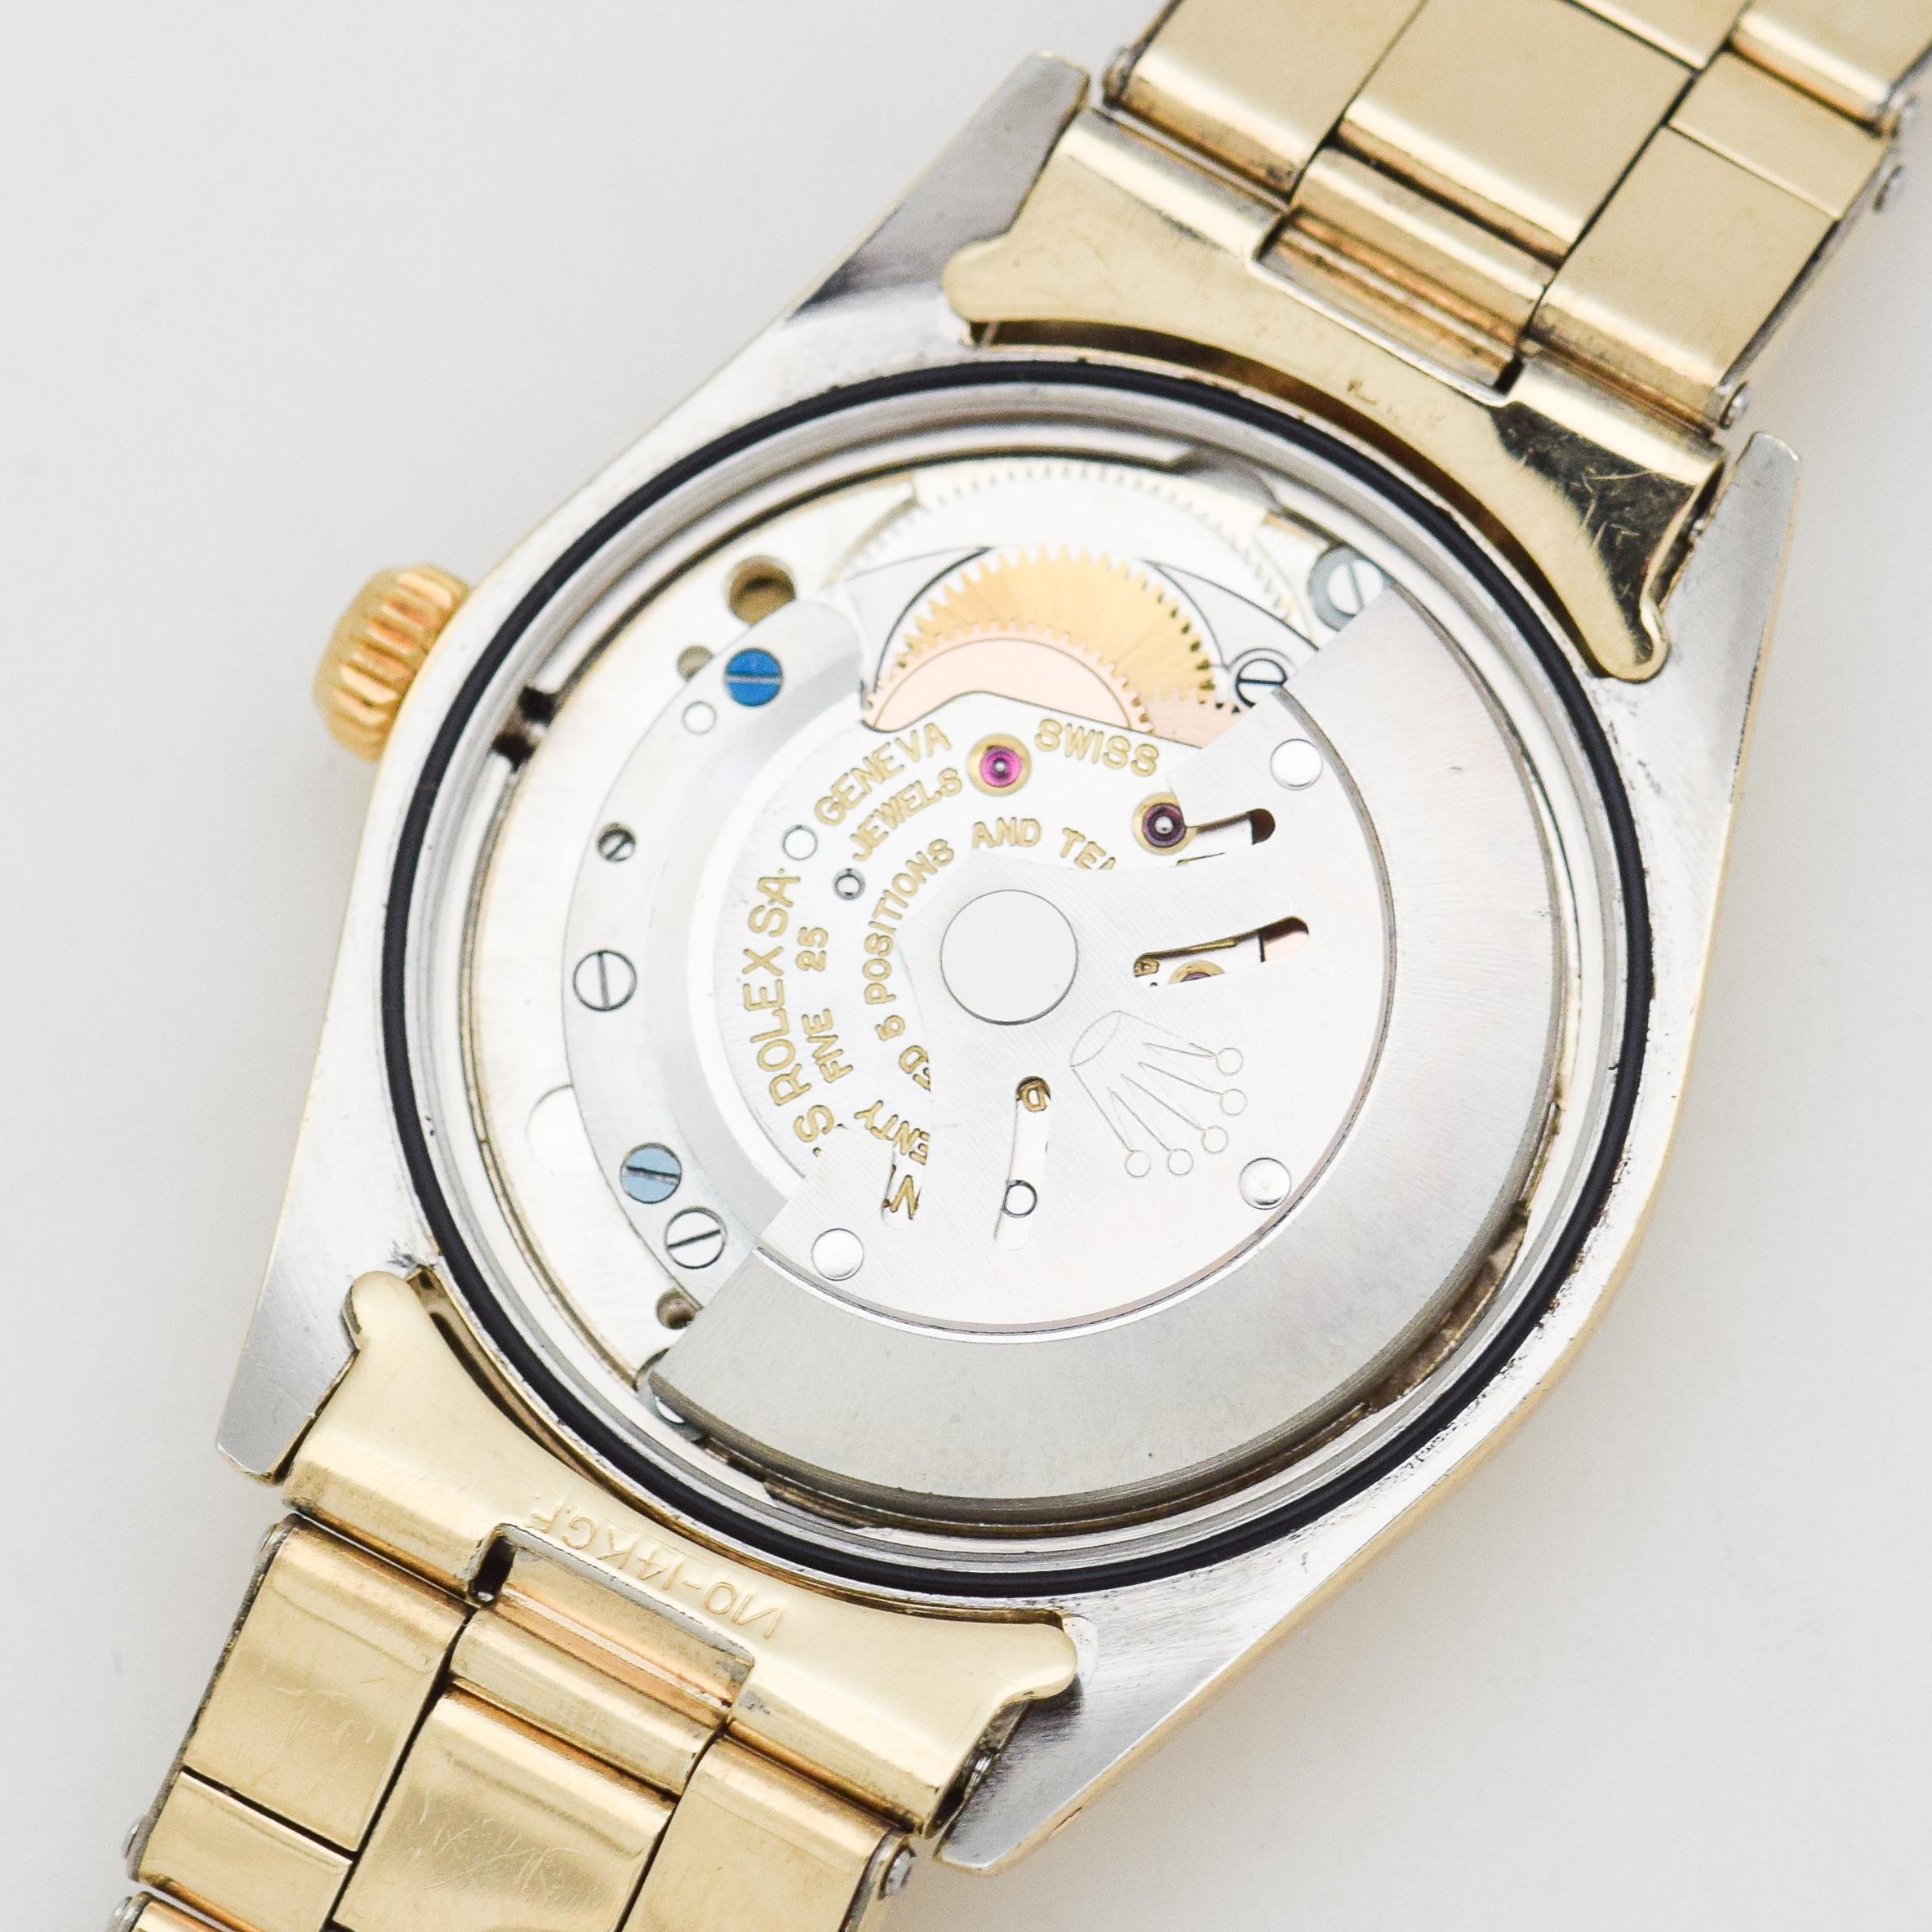 Vintage Rolex Oyster Perpetual Ref. 1014 Watch, 1956 4